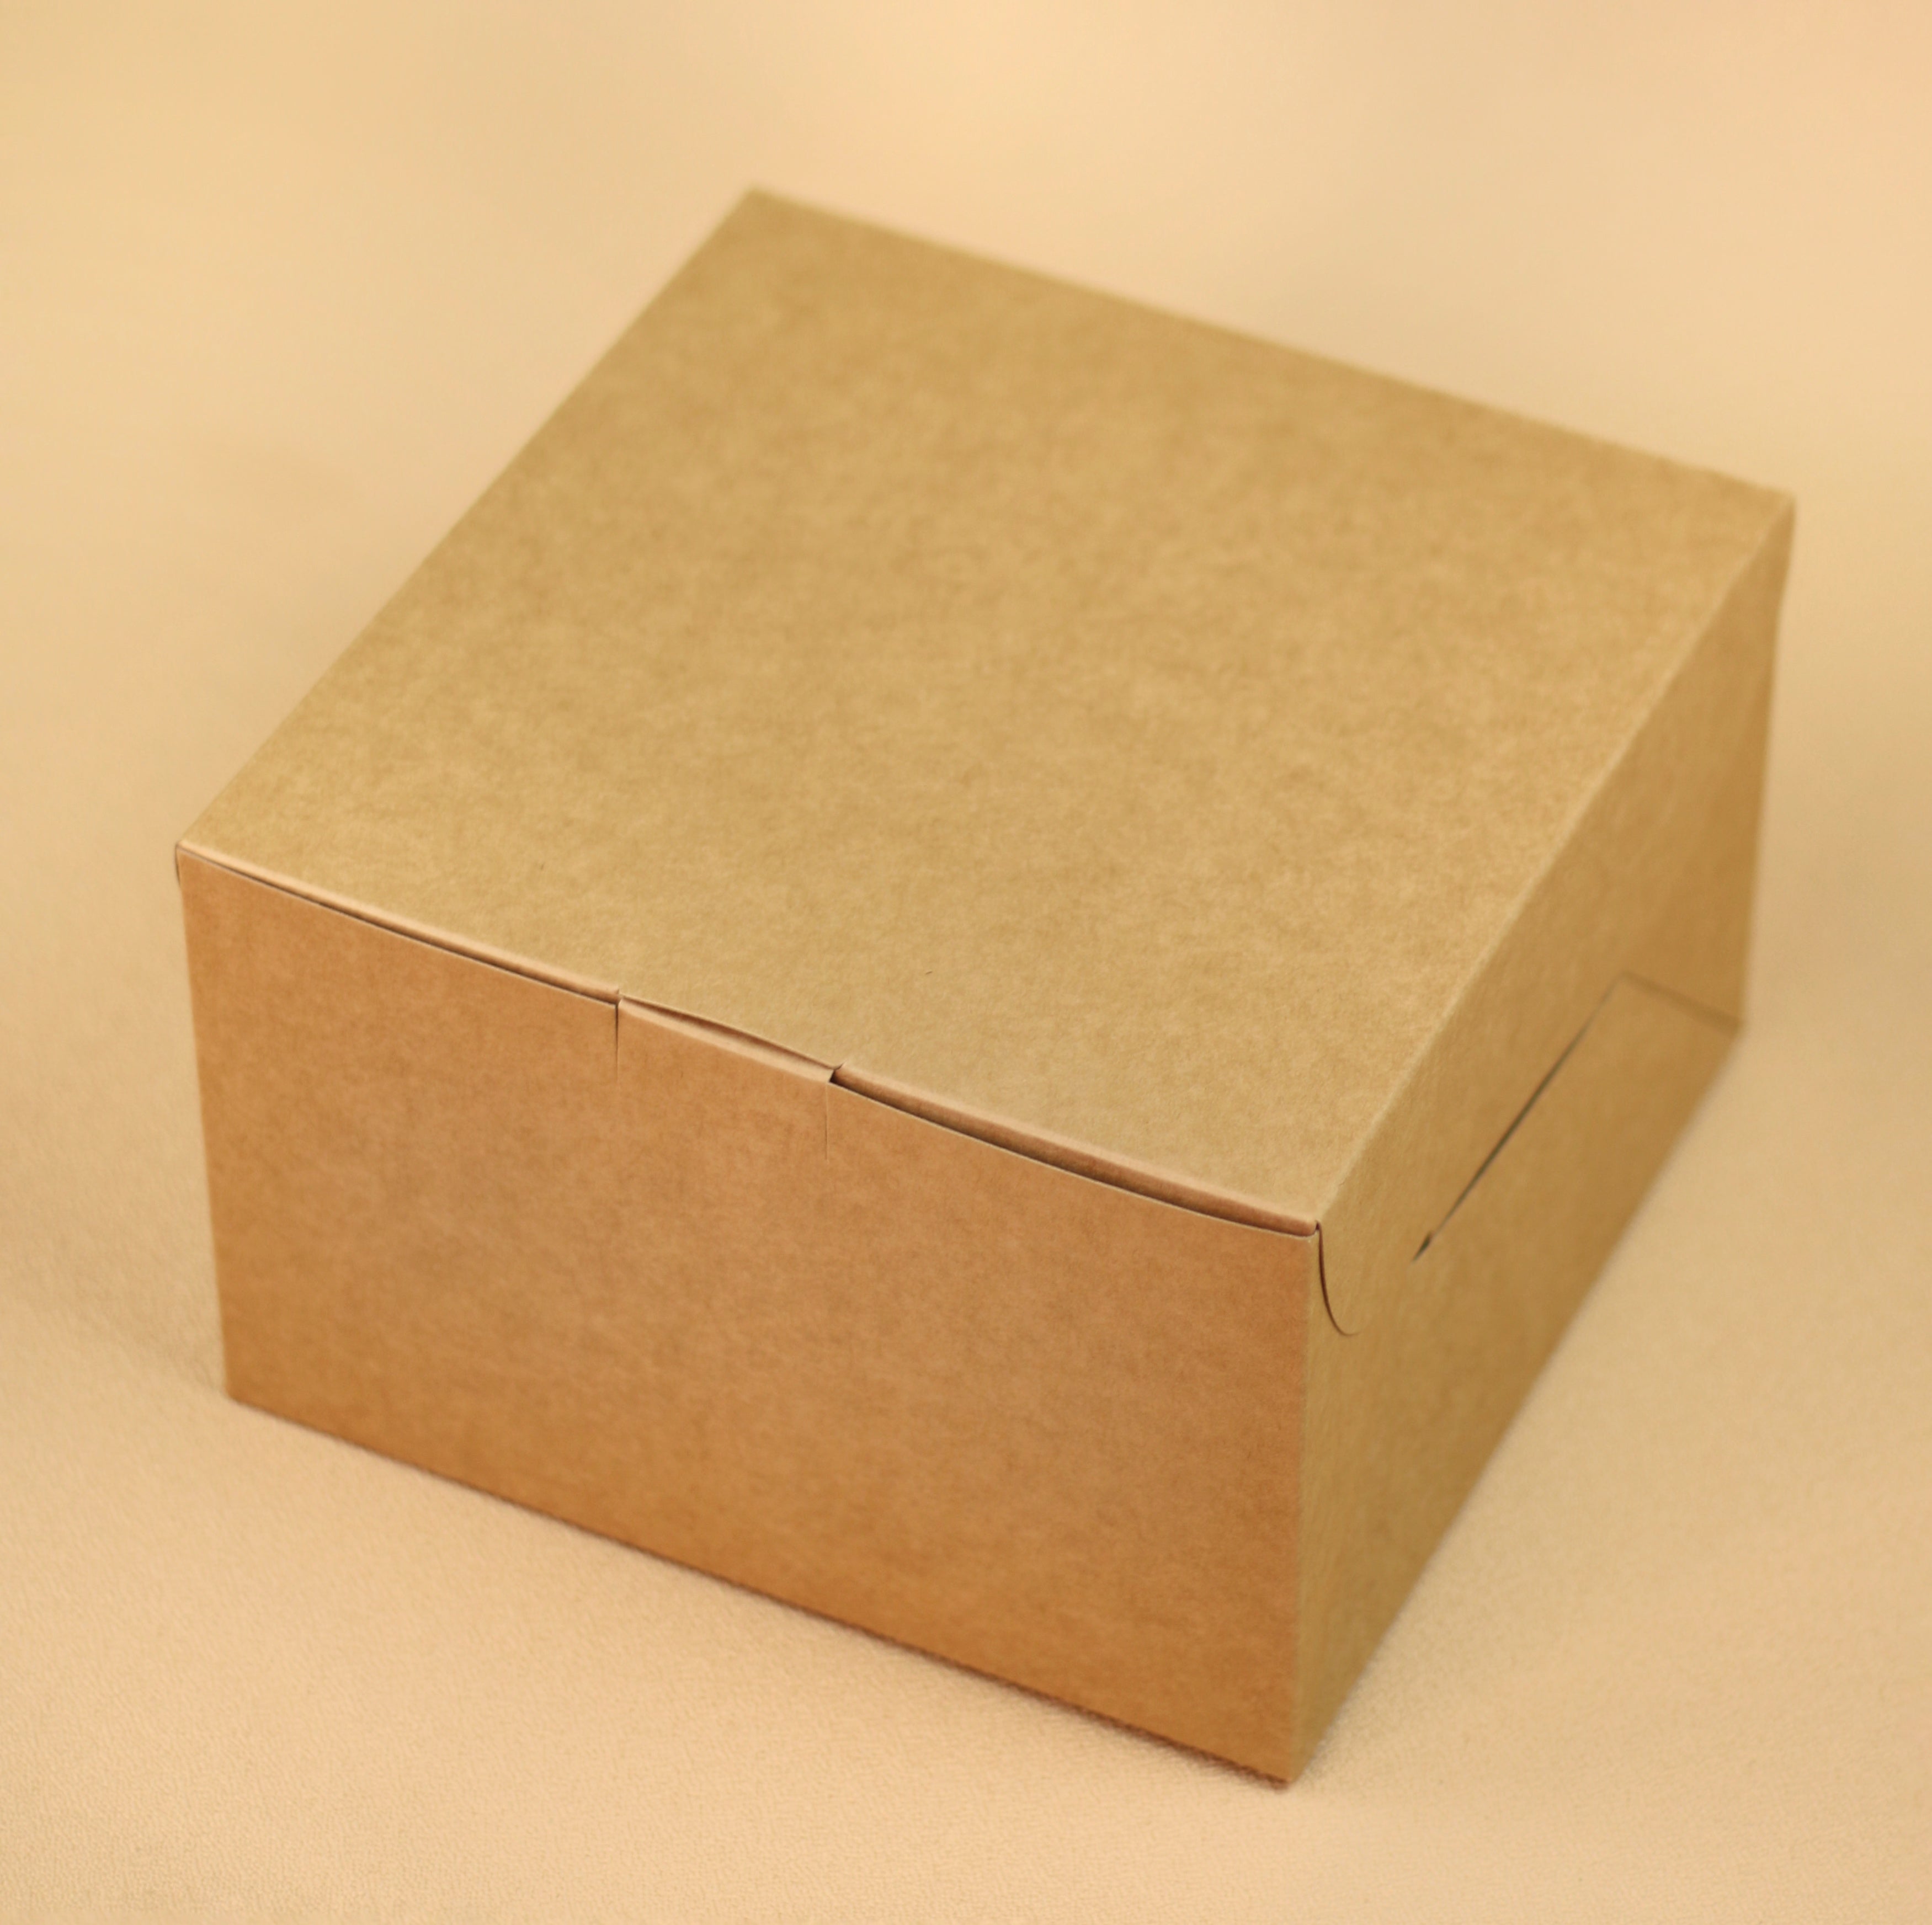 Rectangular Cake Paper Box, Color : Black, Blue, Green, Grey, Orange, Pink,  Purple, Red, White at Rs 20 / Piece in Thane